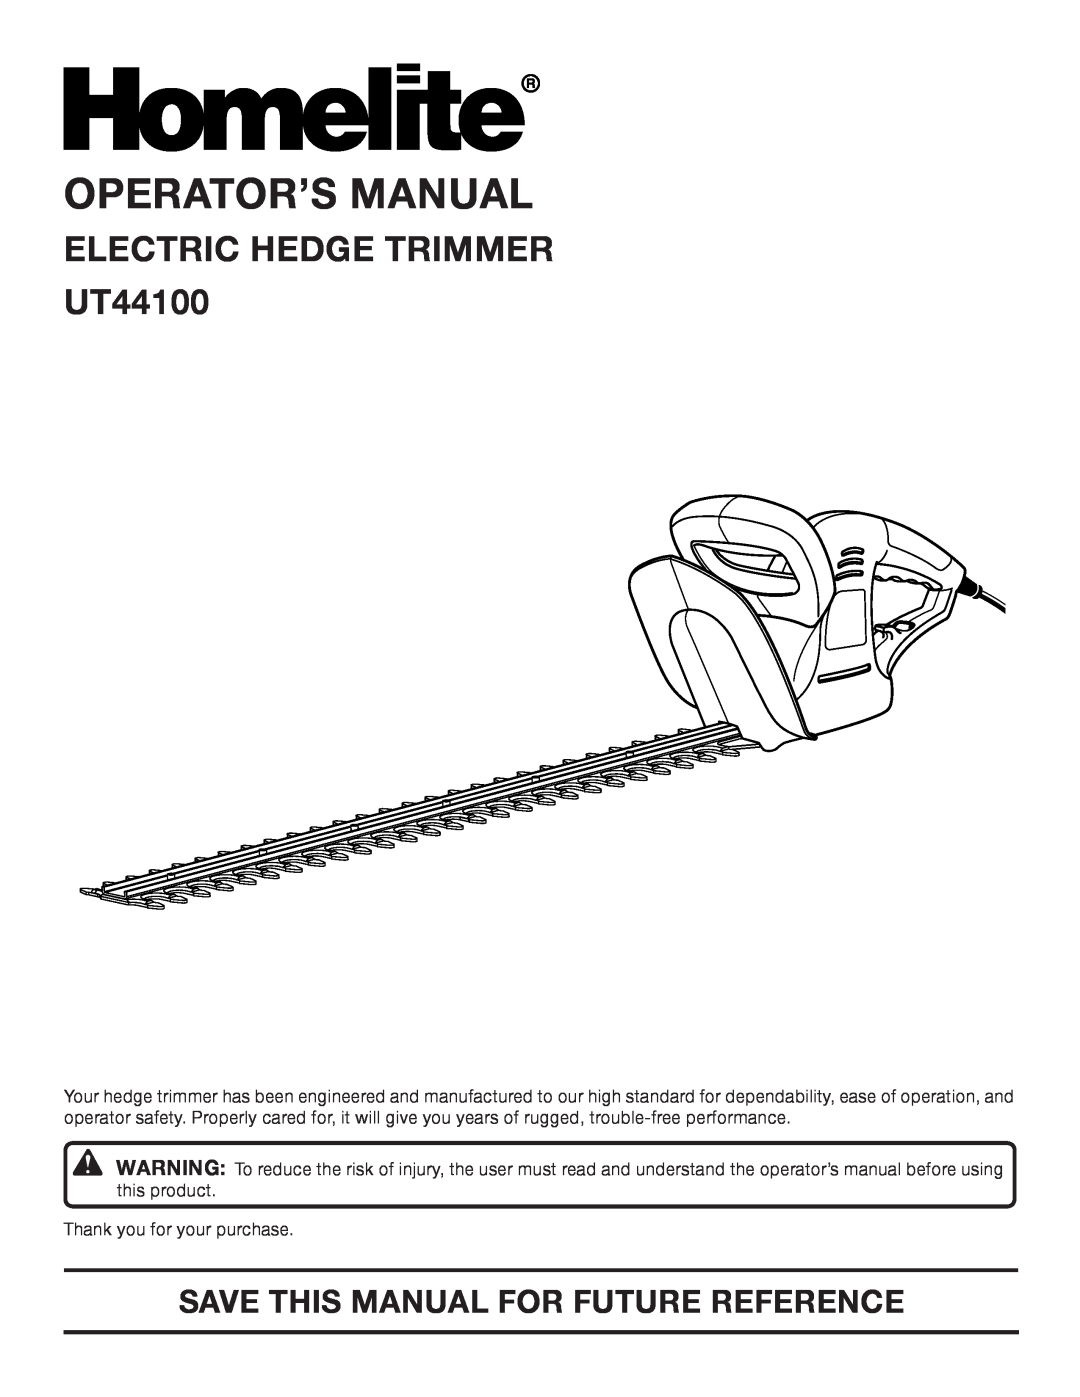 Homelite UT 44100 manual Operator’S Manual, Electric Hedge Trimmer UT44100, Save This Manual For Future Reference 